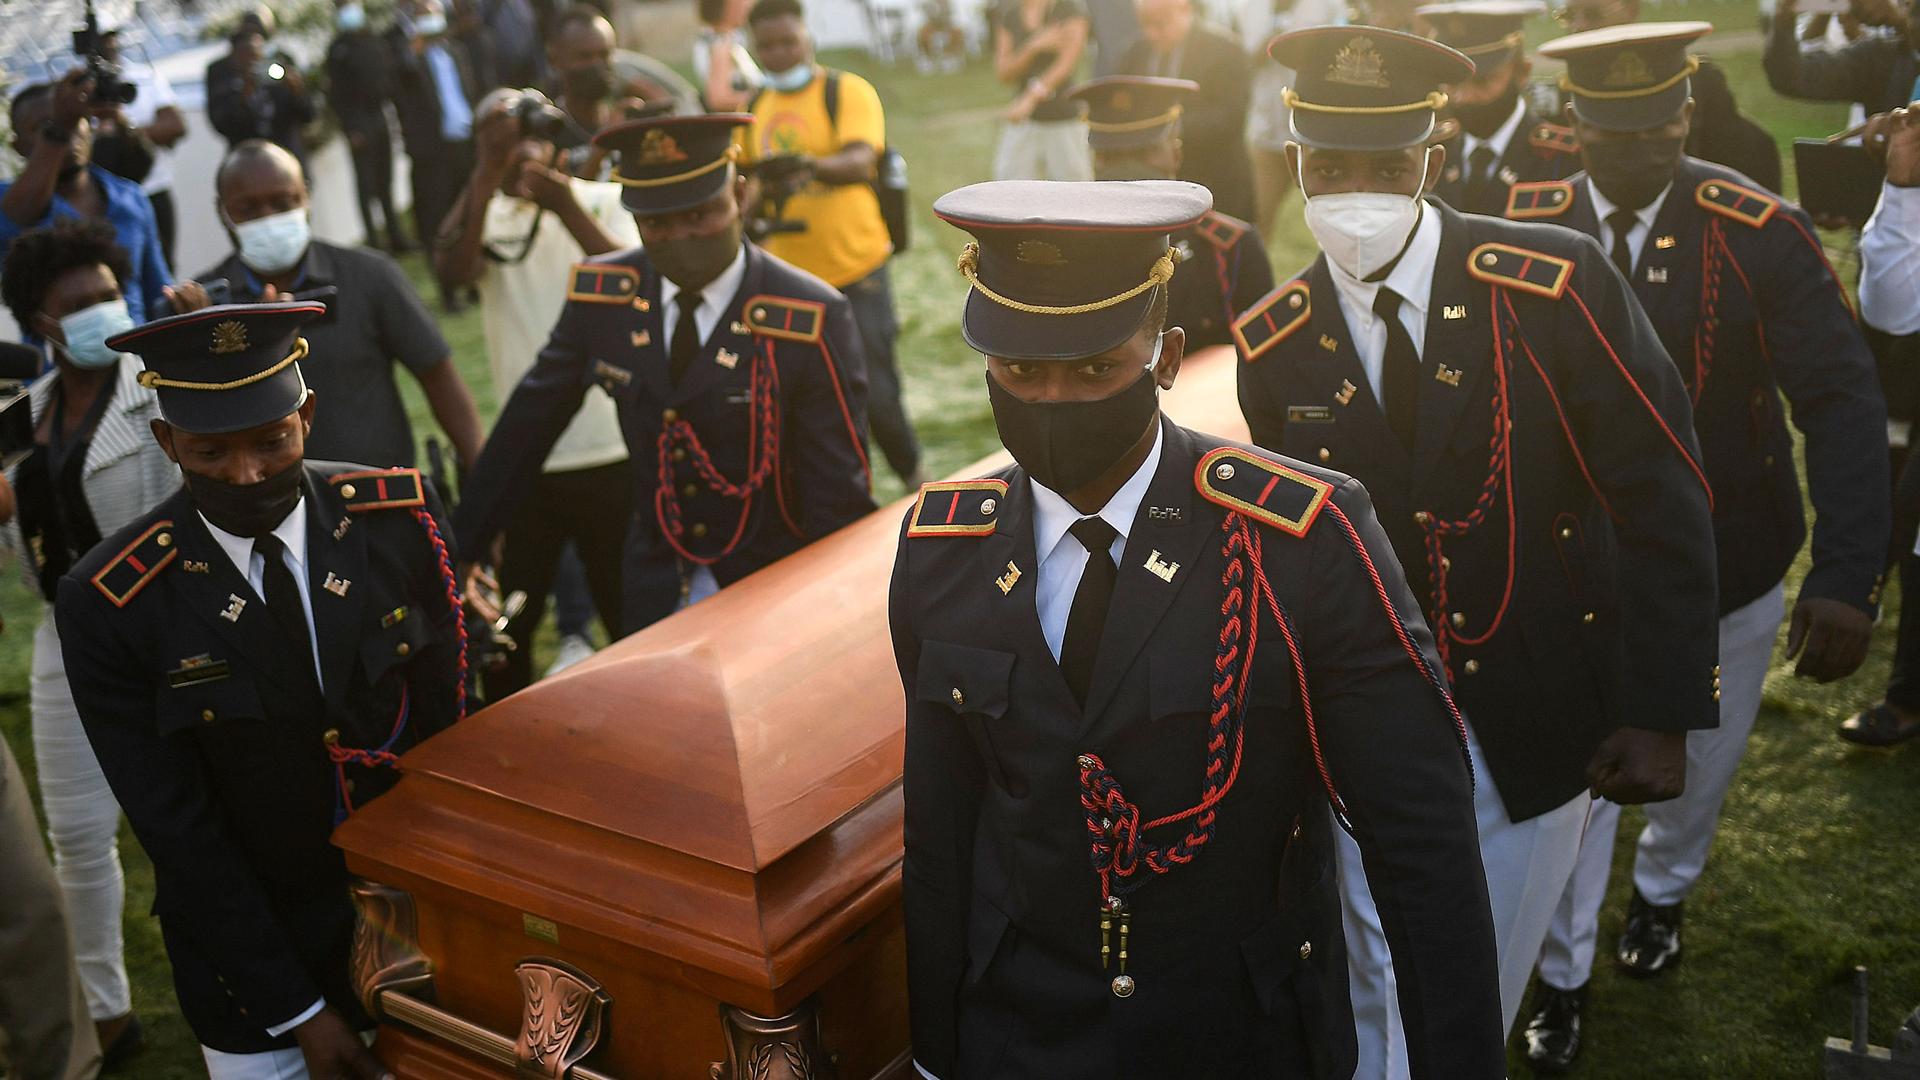 Several men wearing dress military uniforms with service caps are shown carrying a brown wooden coffin.